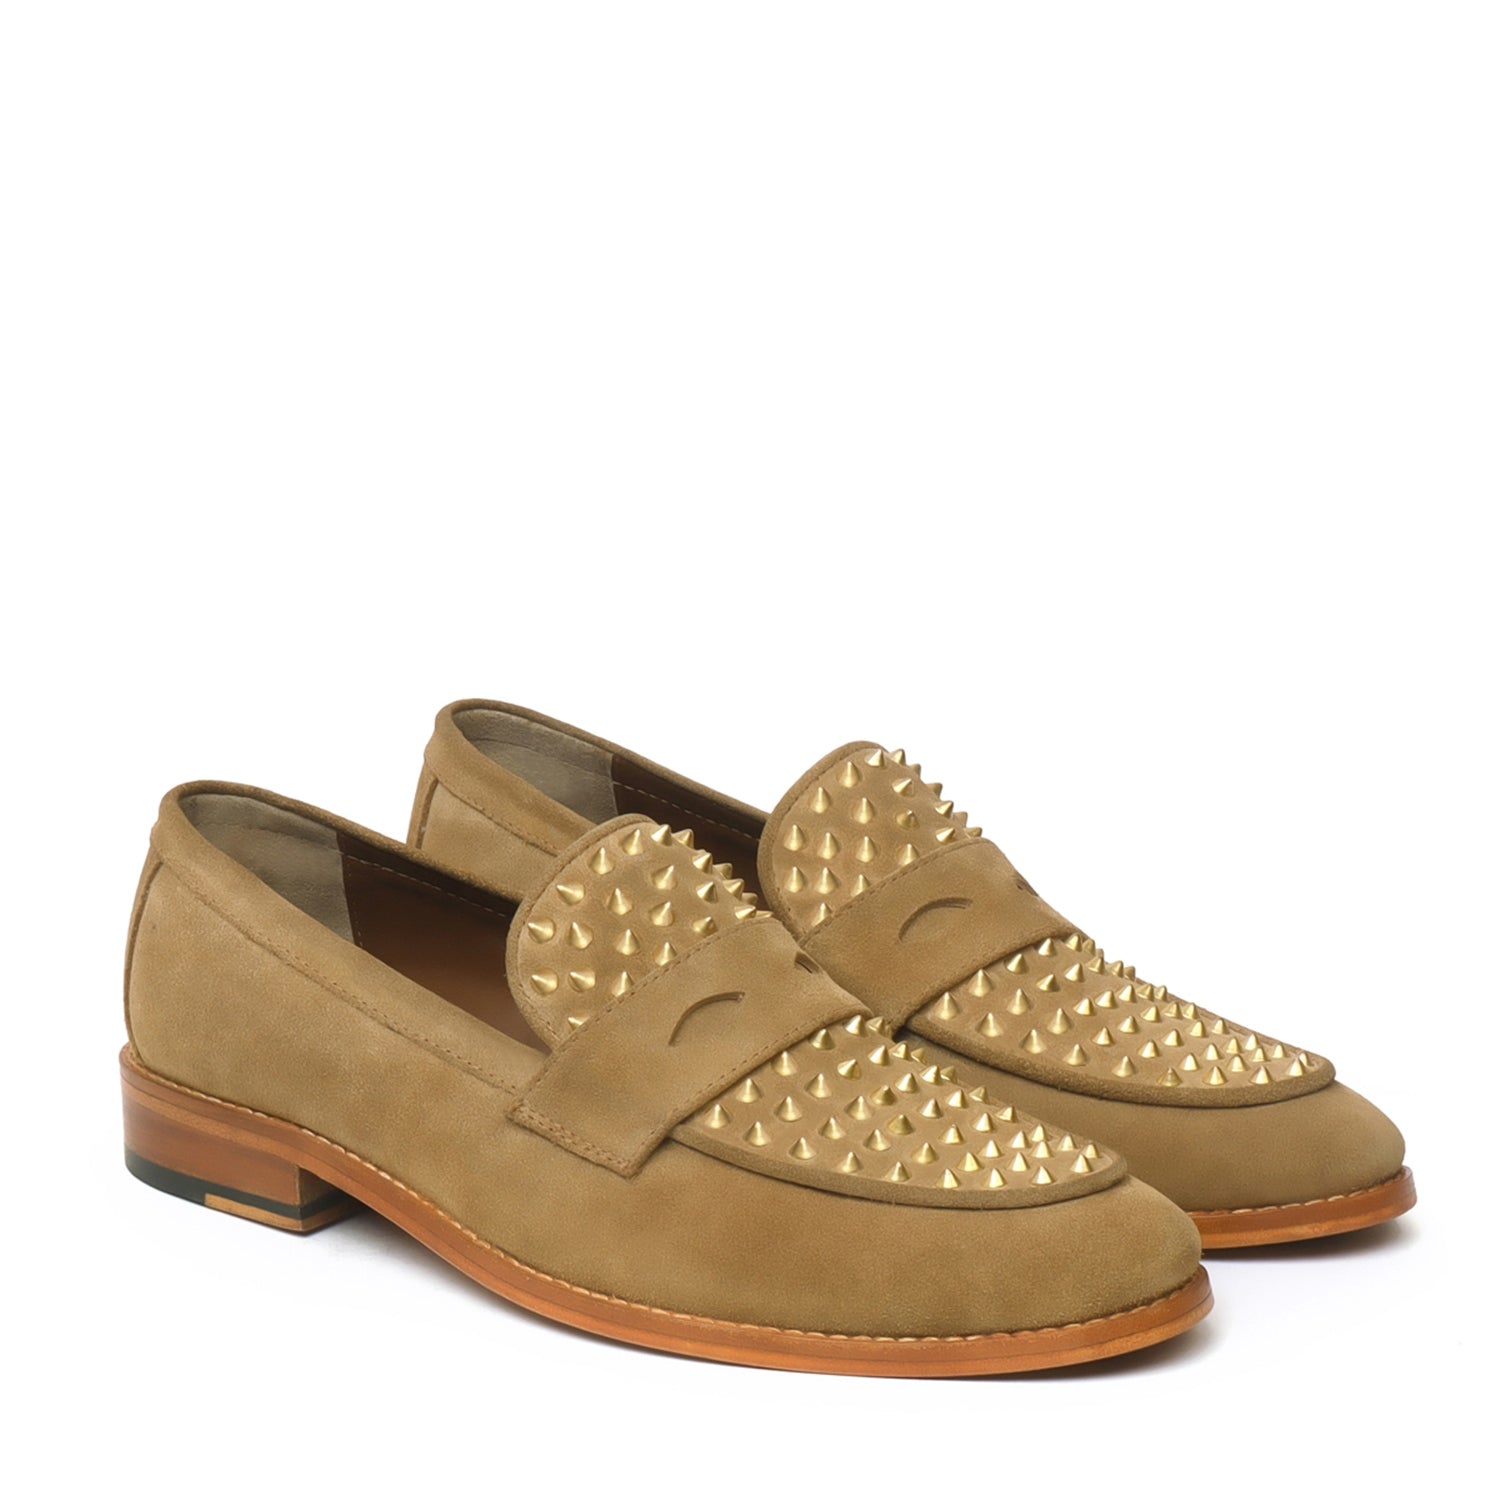 Camel Suede Leather Penny Loafers Studded Toe with Triangular Cut-Strap